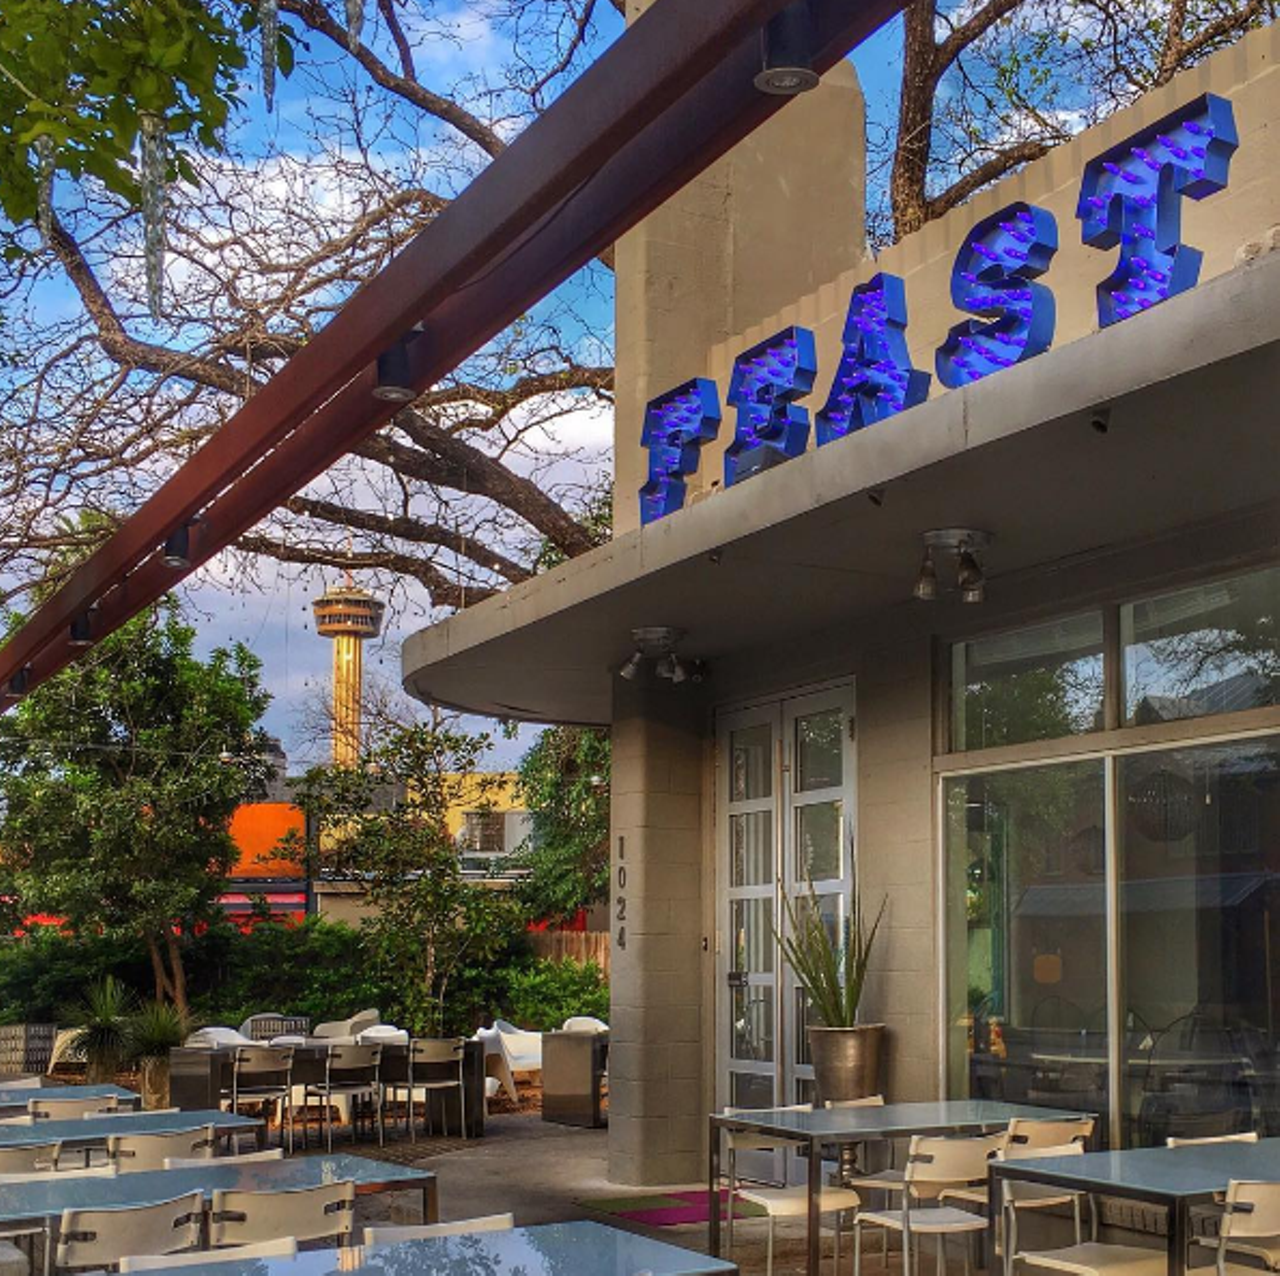 Feast
1024 S Alamo, (210) 354-1024,  Feast
Get there early or risk a long wait time&#151;this is a hoppin&#146; brunch spot for a reason. 
Photo via Instagram,  kwcad